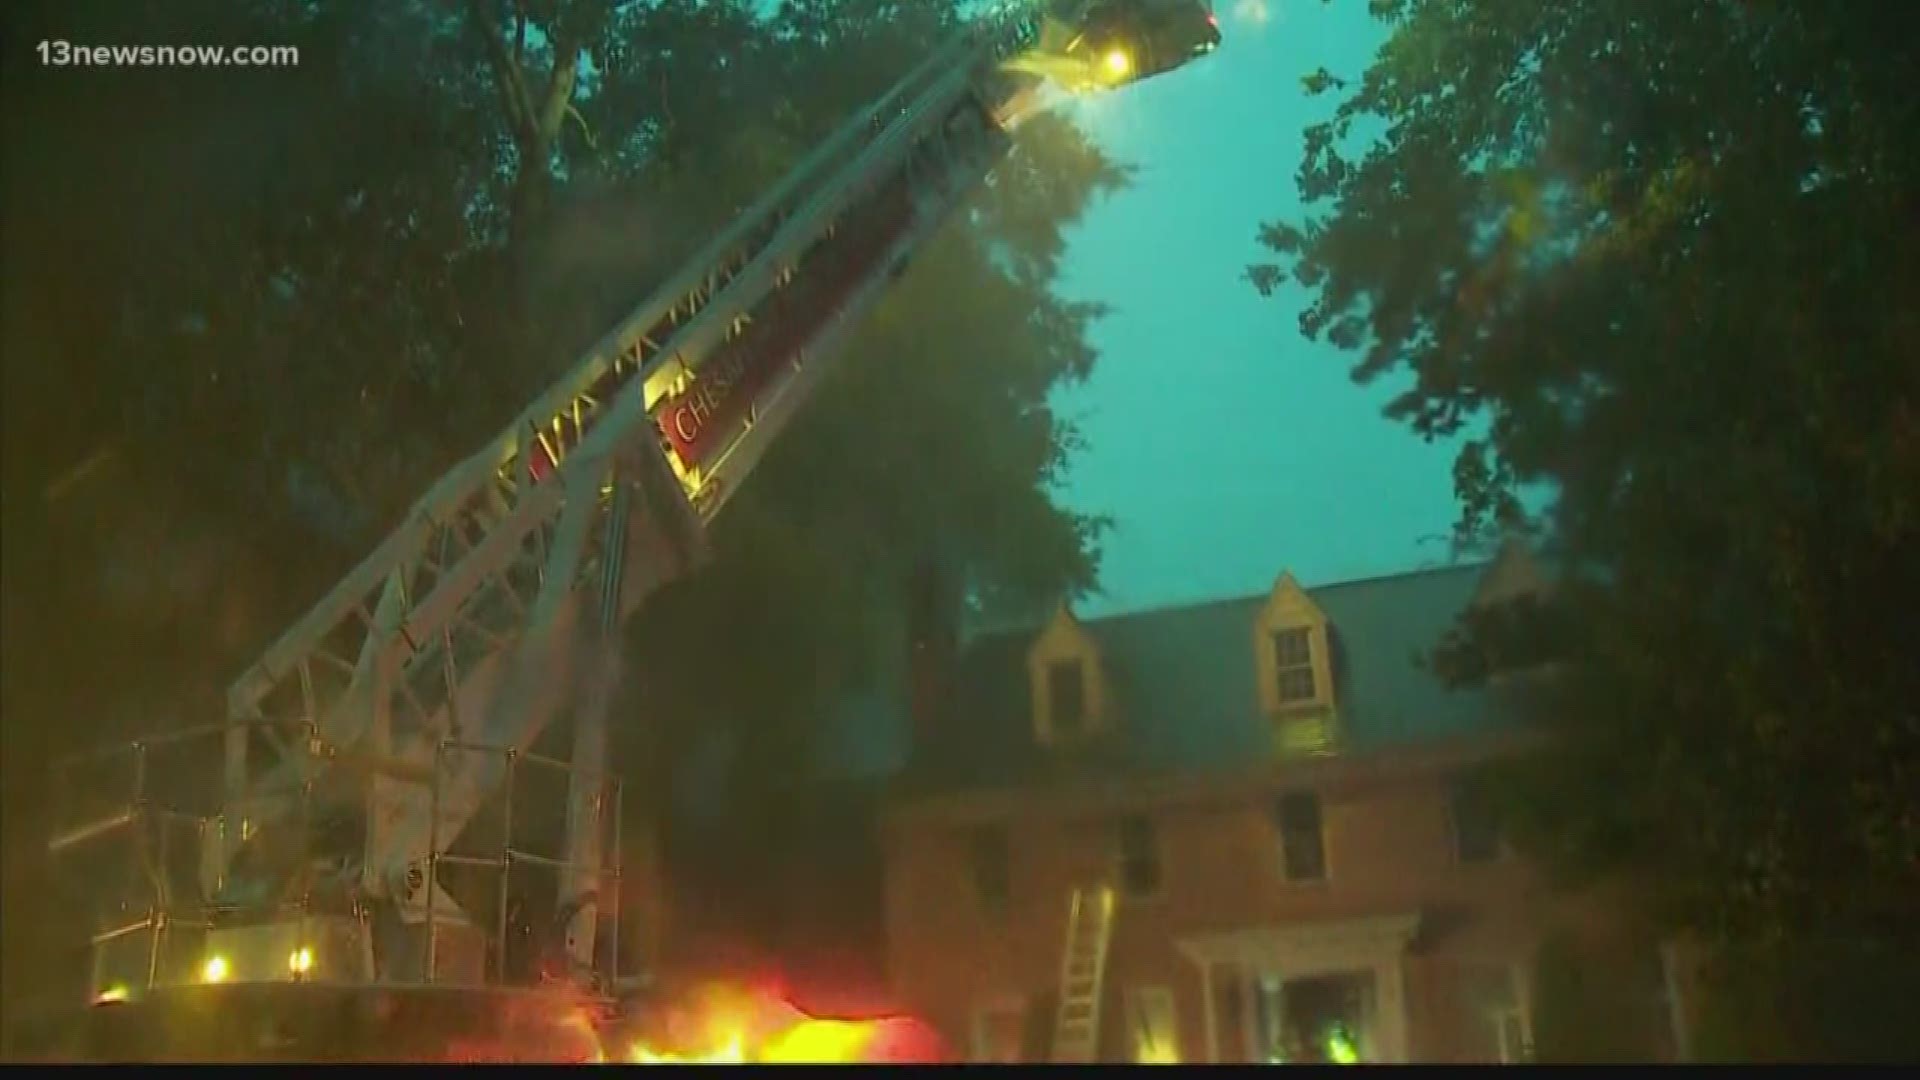 Two people were displaced after flames engulfed part of their home in Chesapeake.